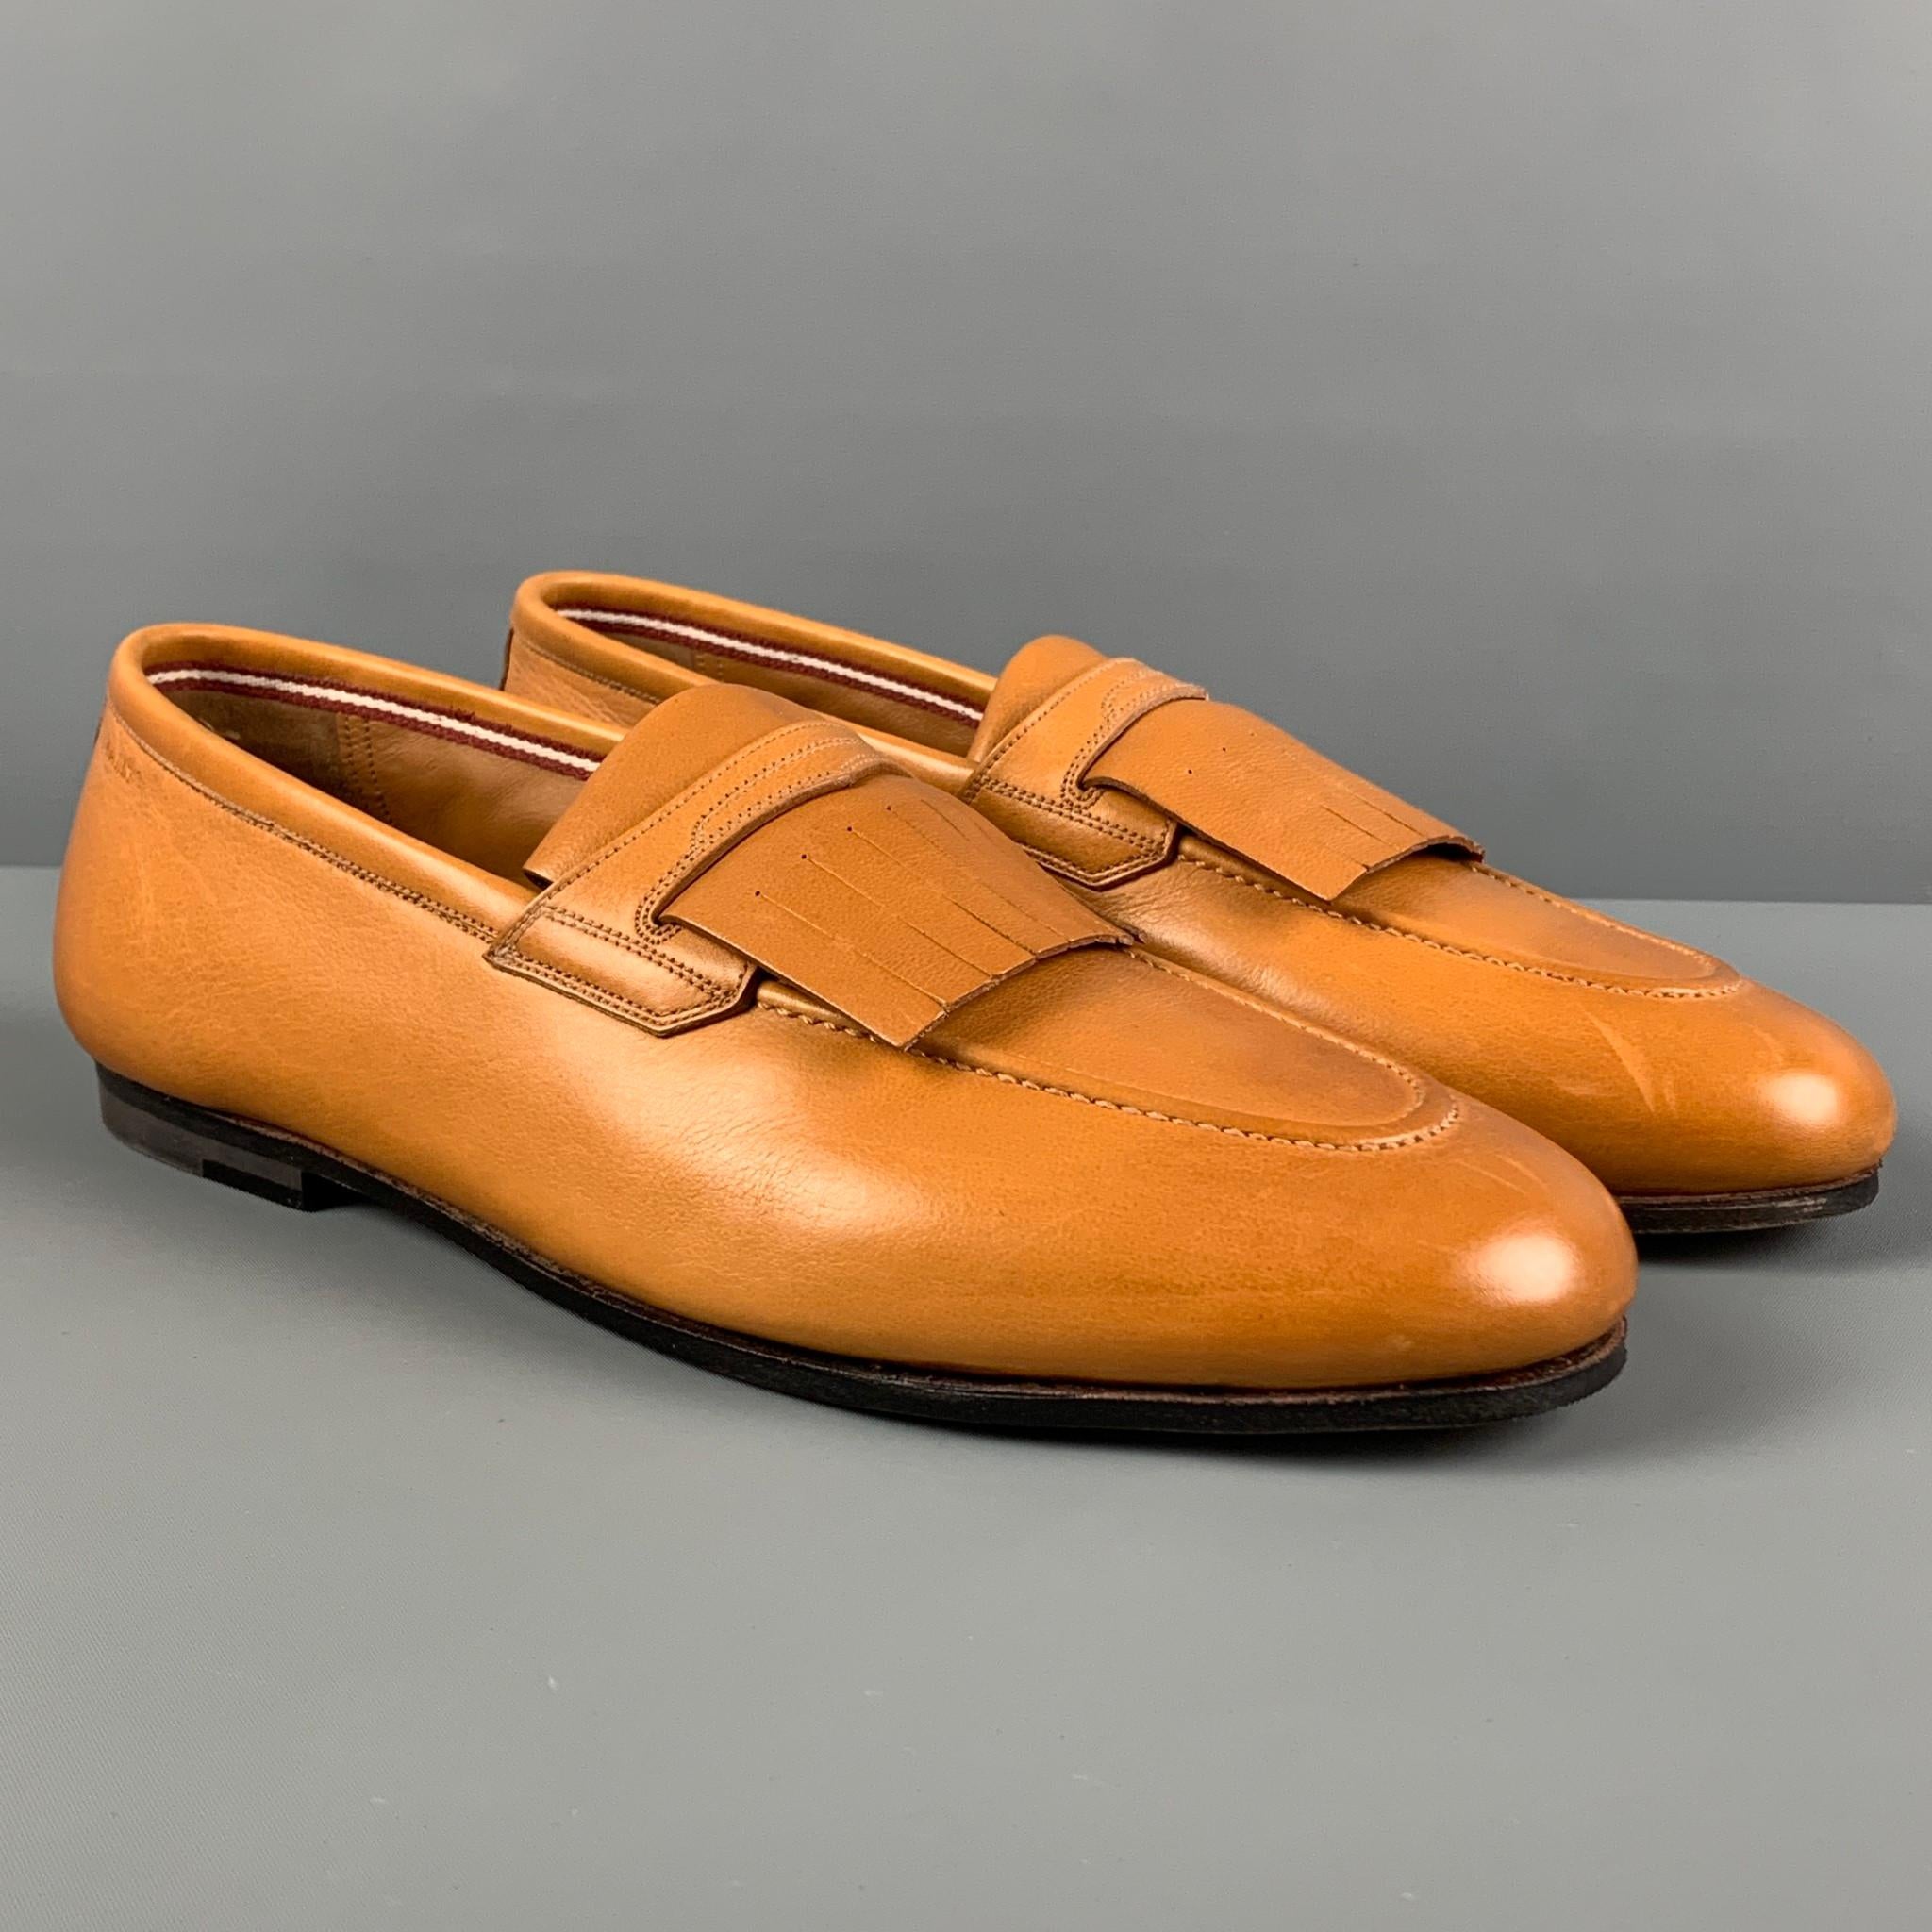 BALLY loafers comes in a honey leather featuring a front fringe design and a slip on style. Includes box. 

Excellent Pre-Owned Condition.
Marked: EU 6.5 / US 7.5

Outsole: 11 in. x 3.75 in. 